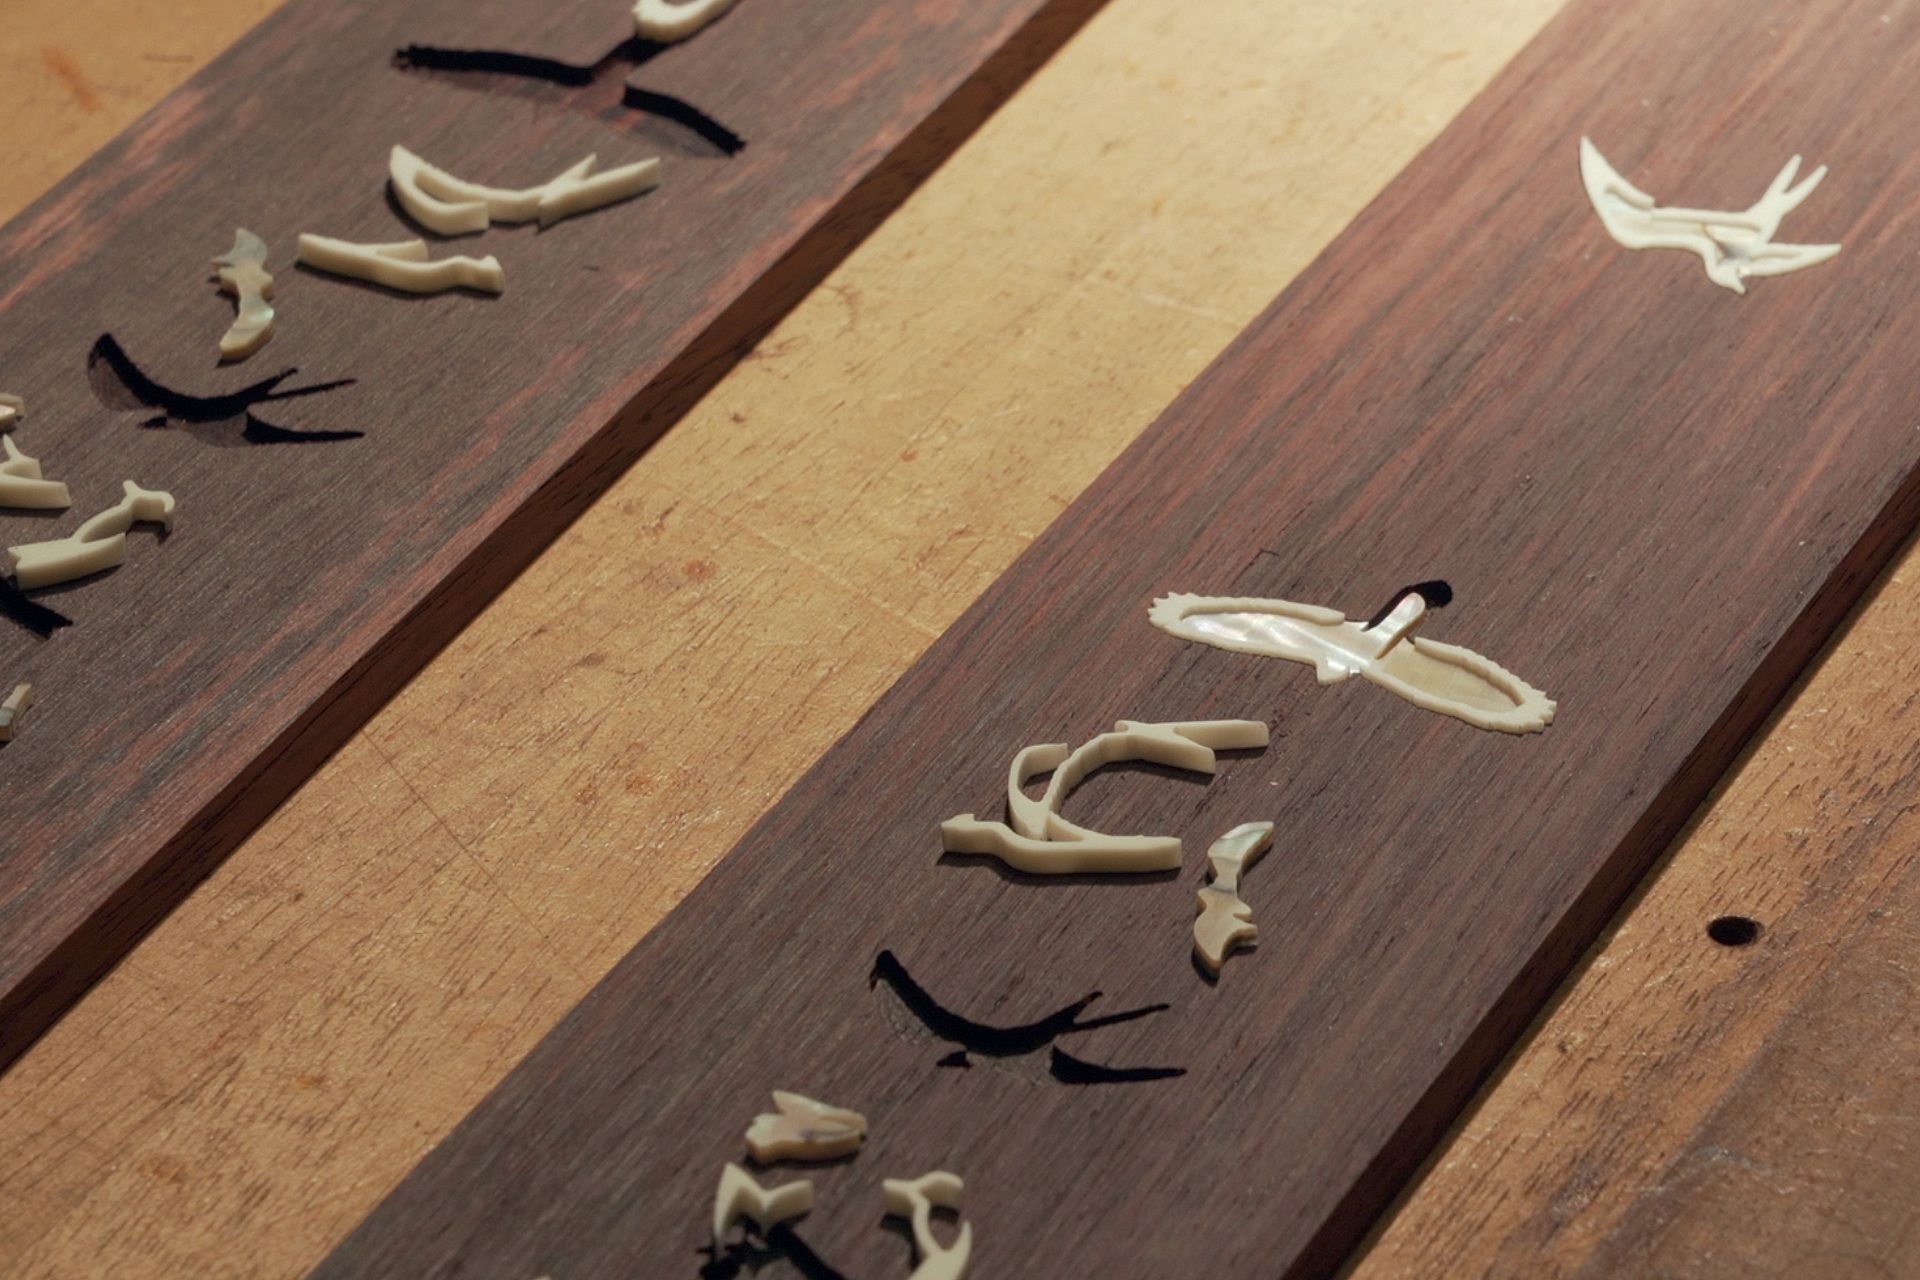 Watch How We Create Our Bird Inlays!